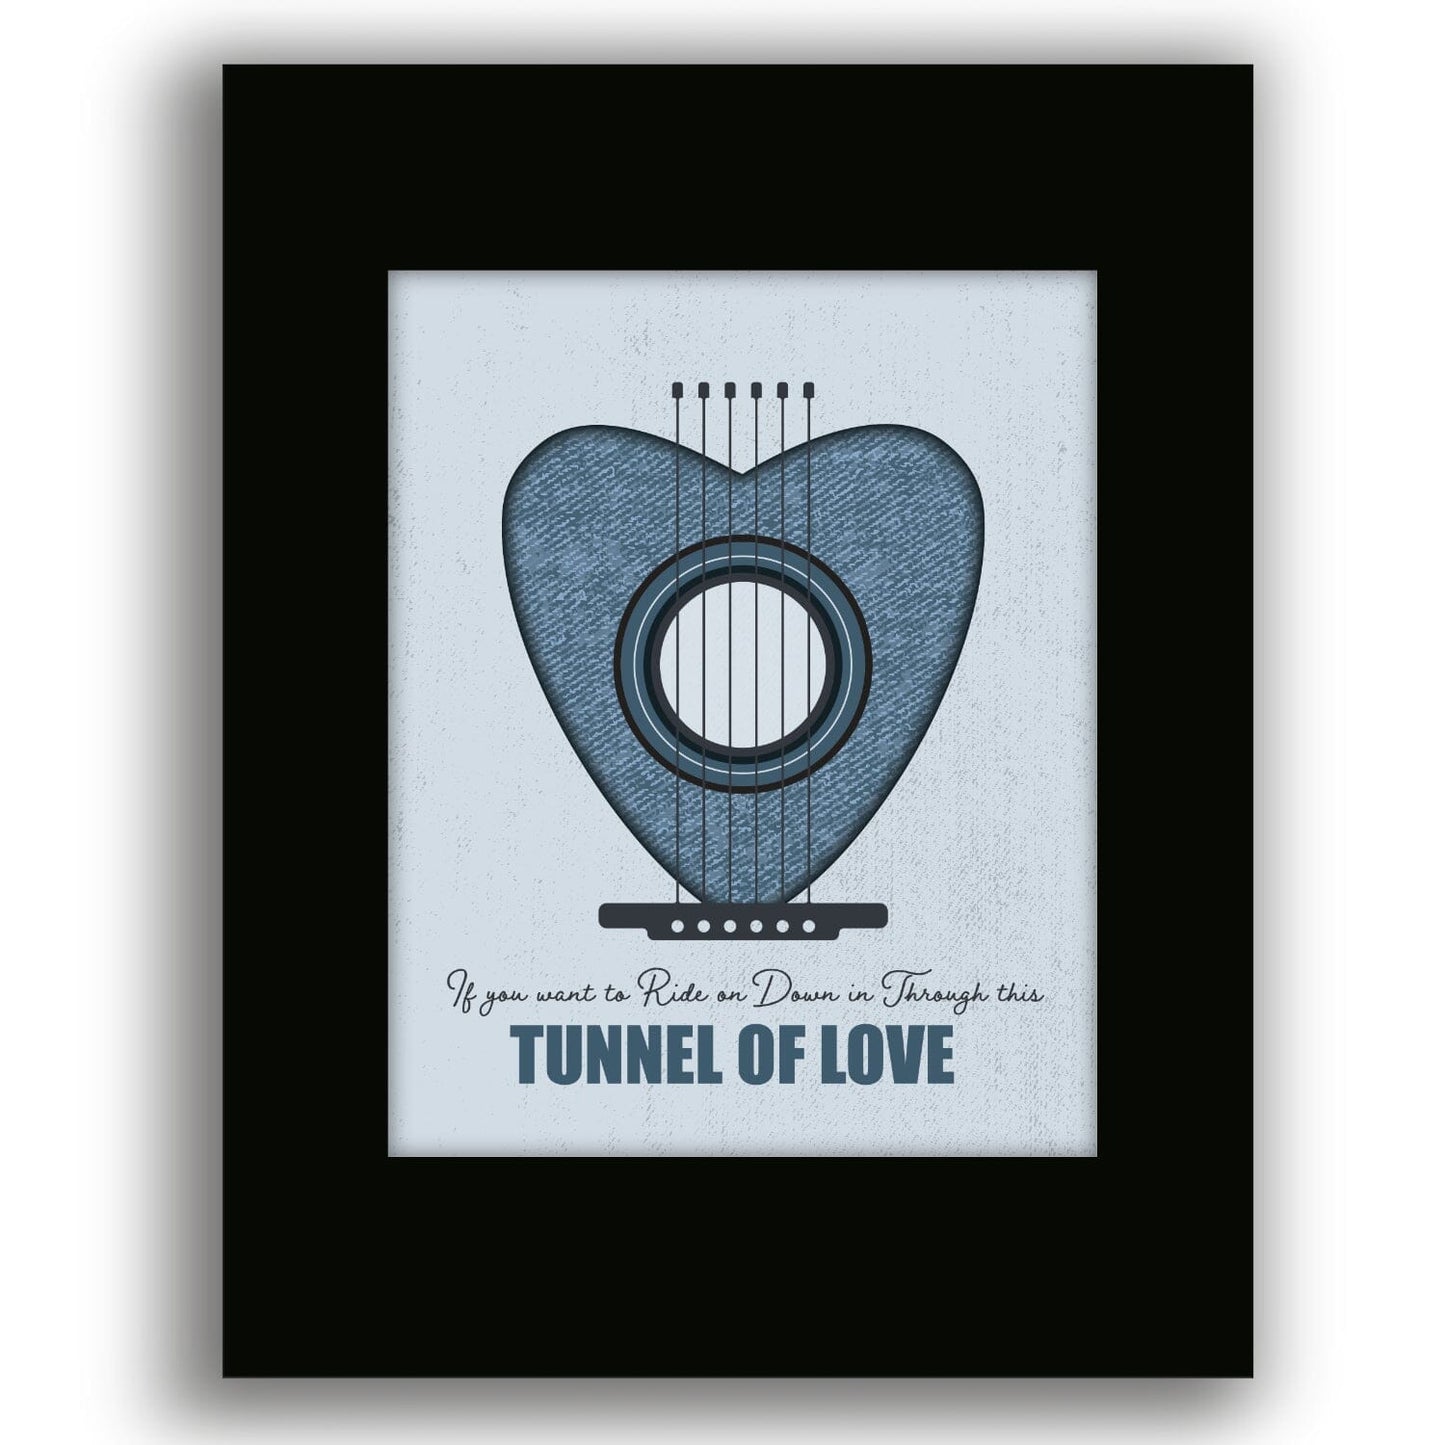 Tunnel of Love by Bruce Springsteen - Lyric Rock Music Art Song Lyrics Art Song Lyrics Art 8x10 Black Matted Print 